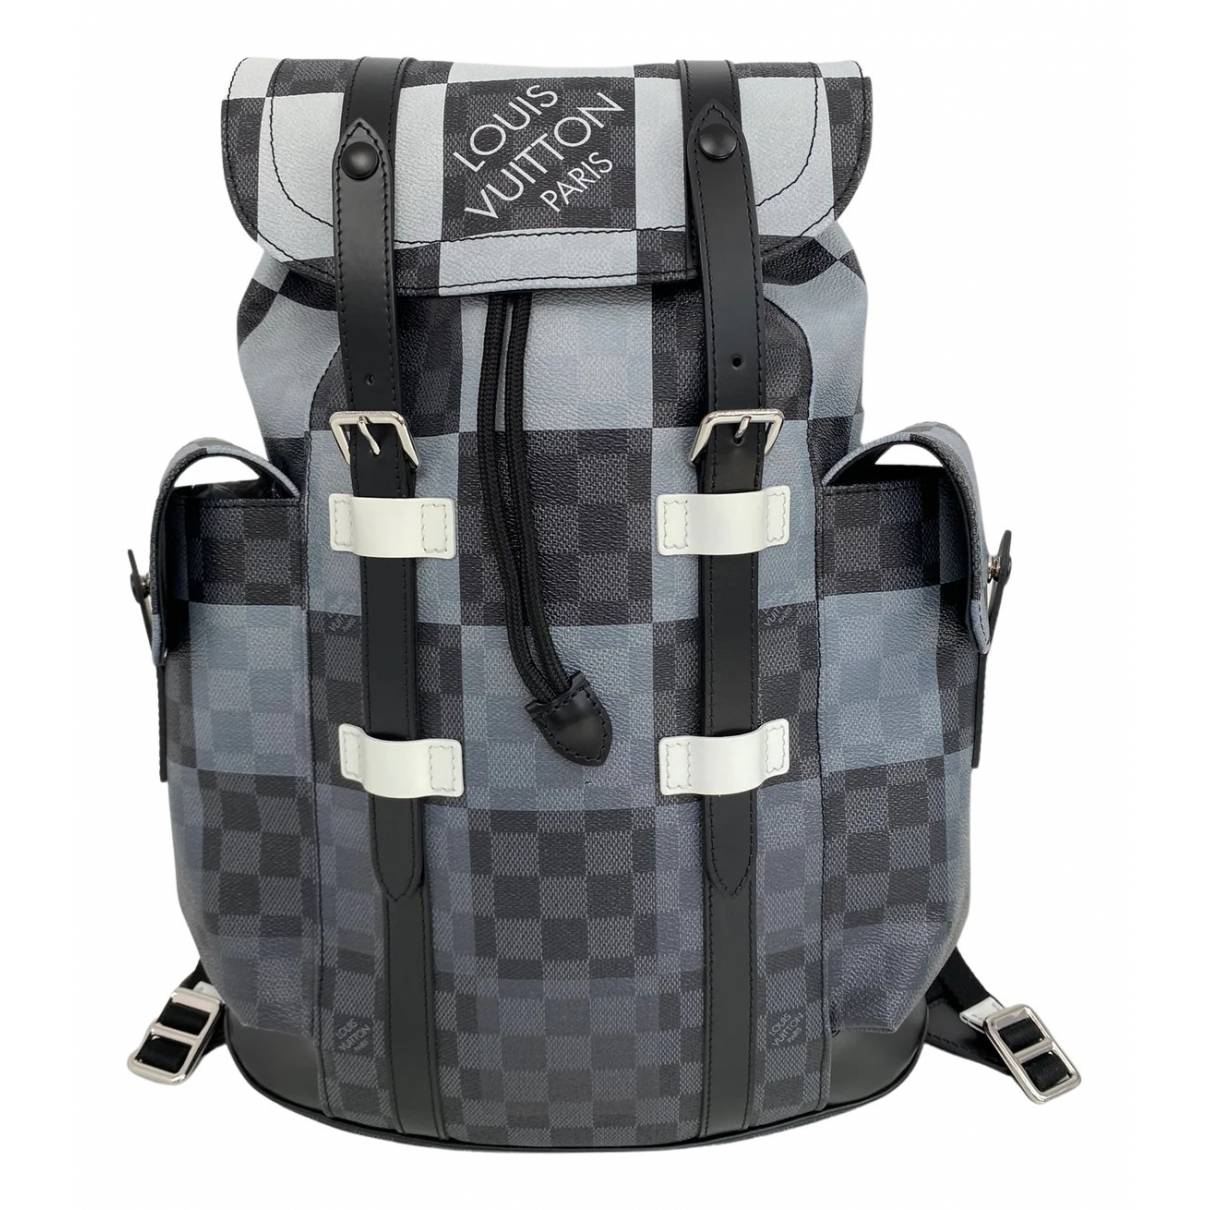 christopher backpack price